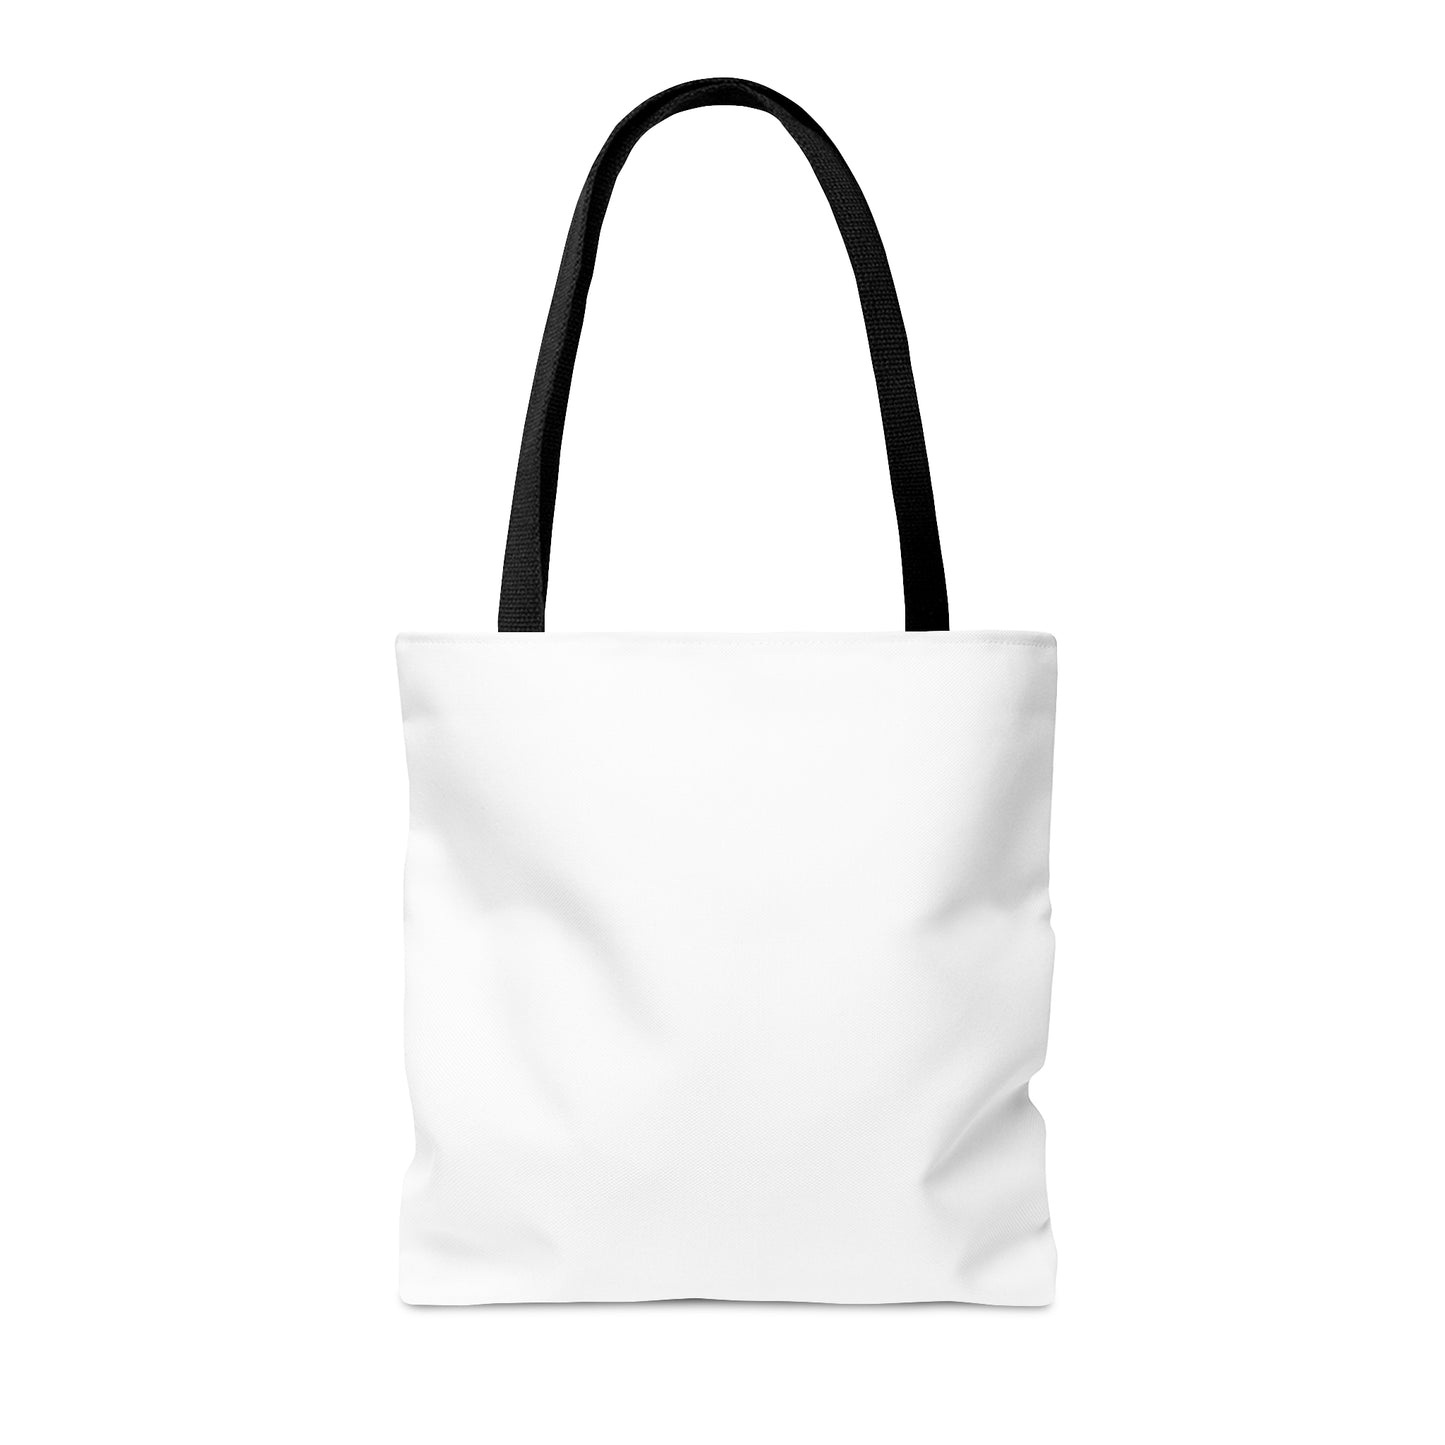 God Is Greater Christian Tote Bag Printify